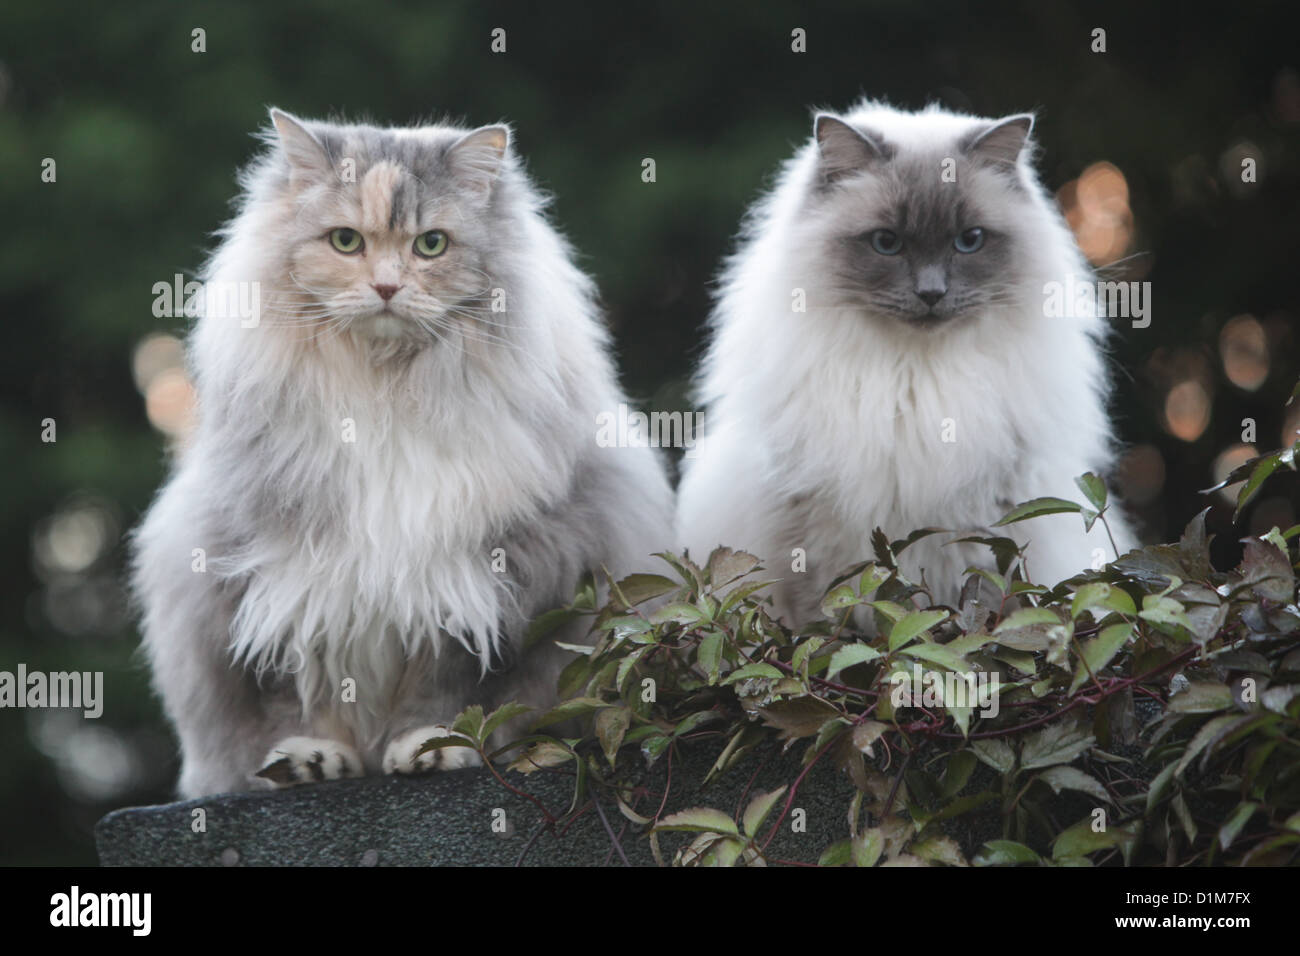 Ragdoll Cat Images Browse 14607 Stock Photos  Vectors Free Download with  Trial  Shutterstock